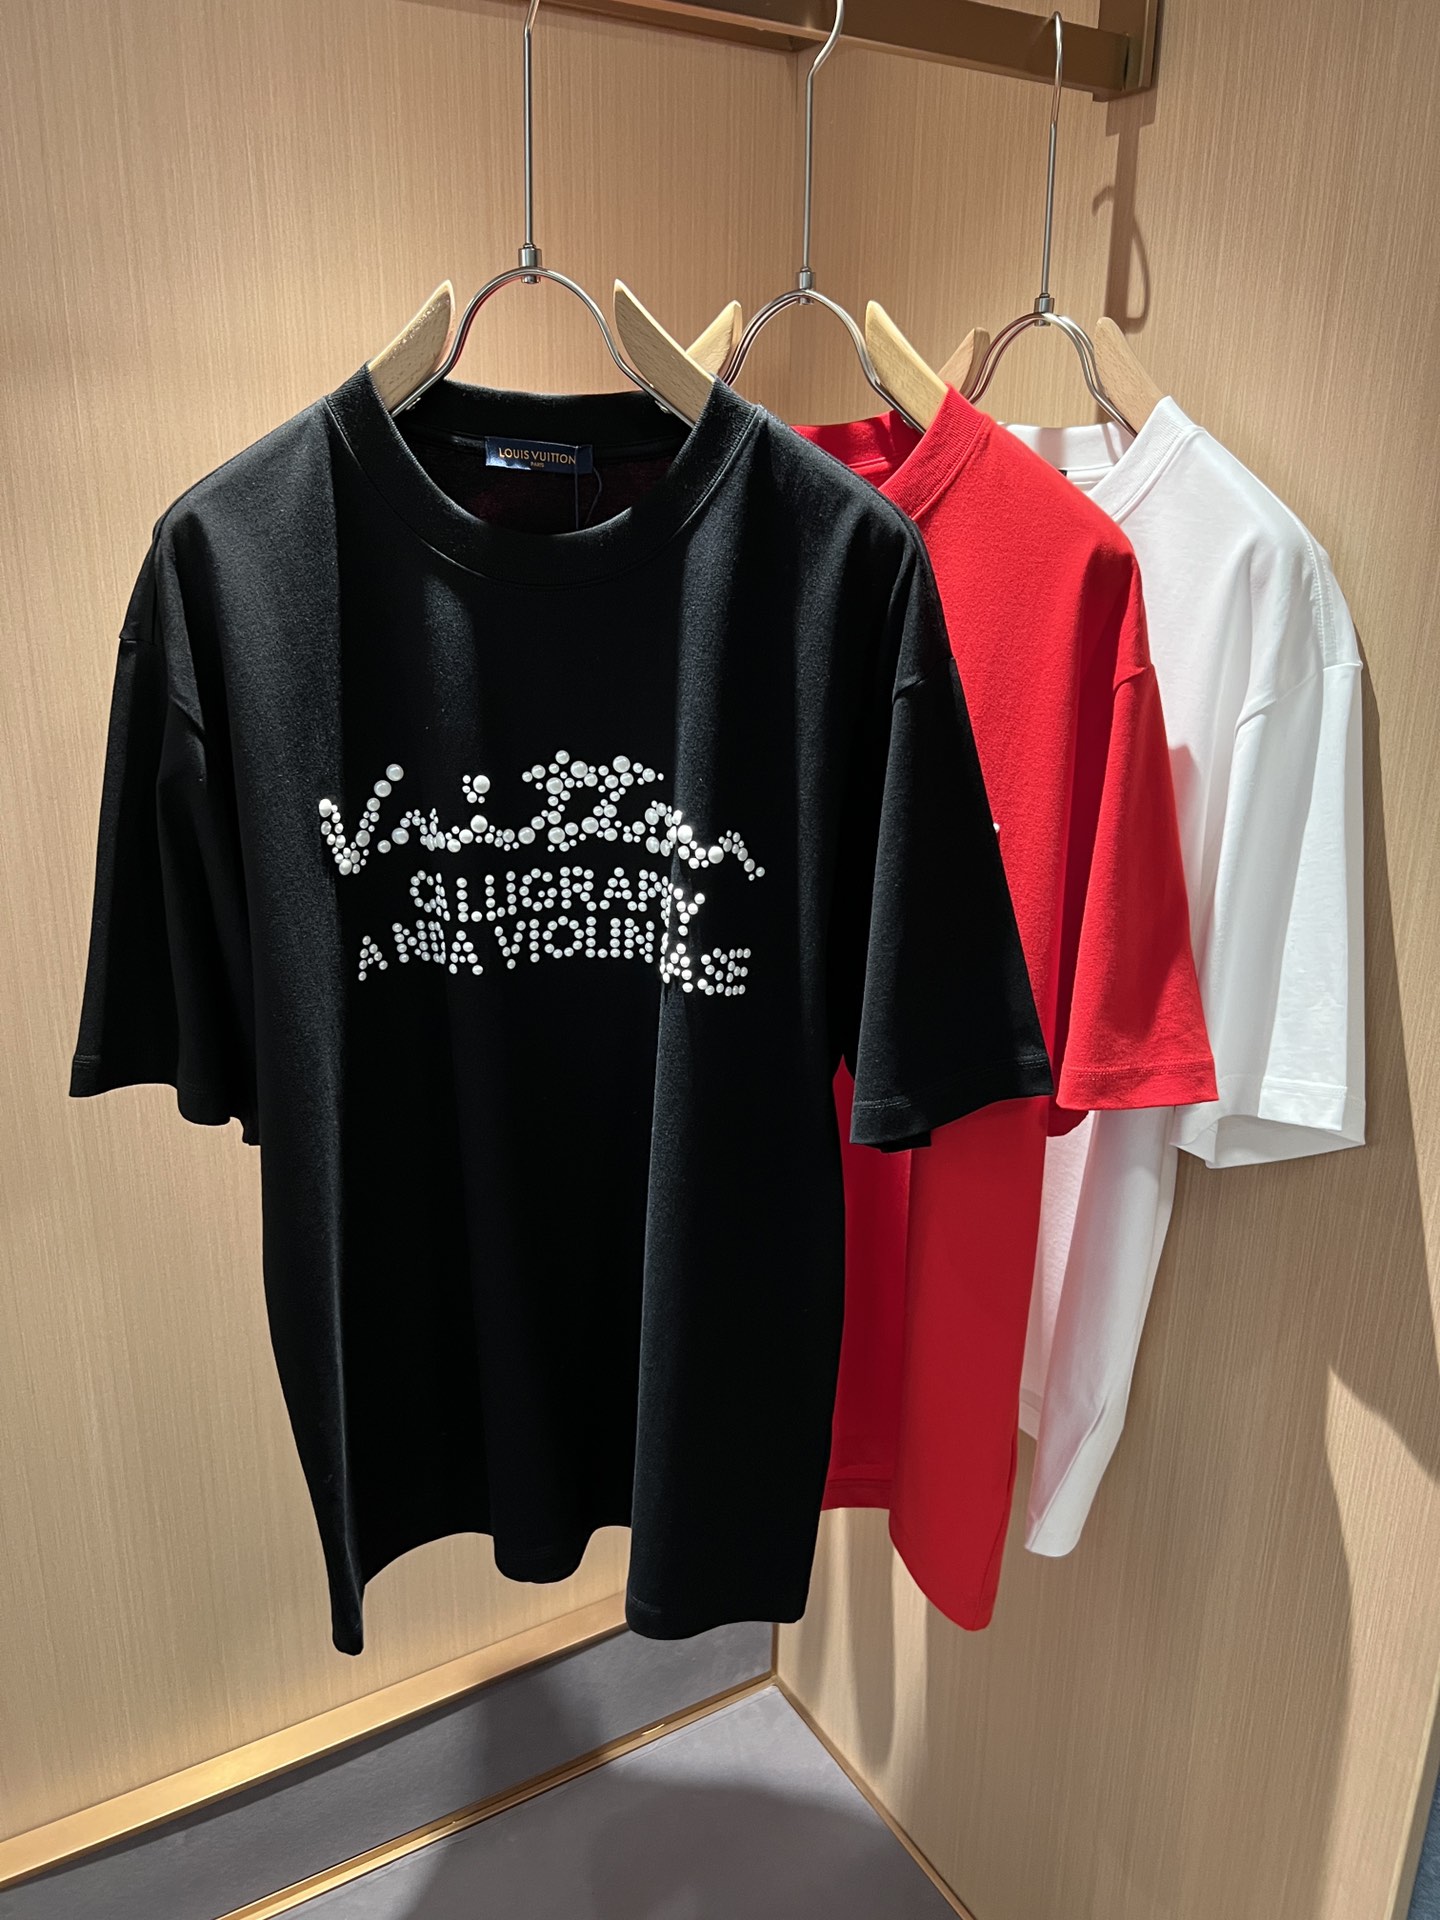 Highest quality replica
 Louis Vuitton Clothing T-Shirt New Designer Replica
 Unisex Cotton Spring/Summer Collection Short Sleeve